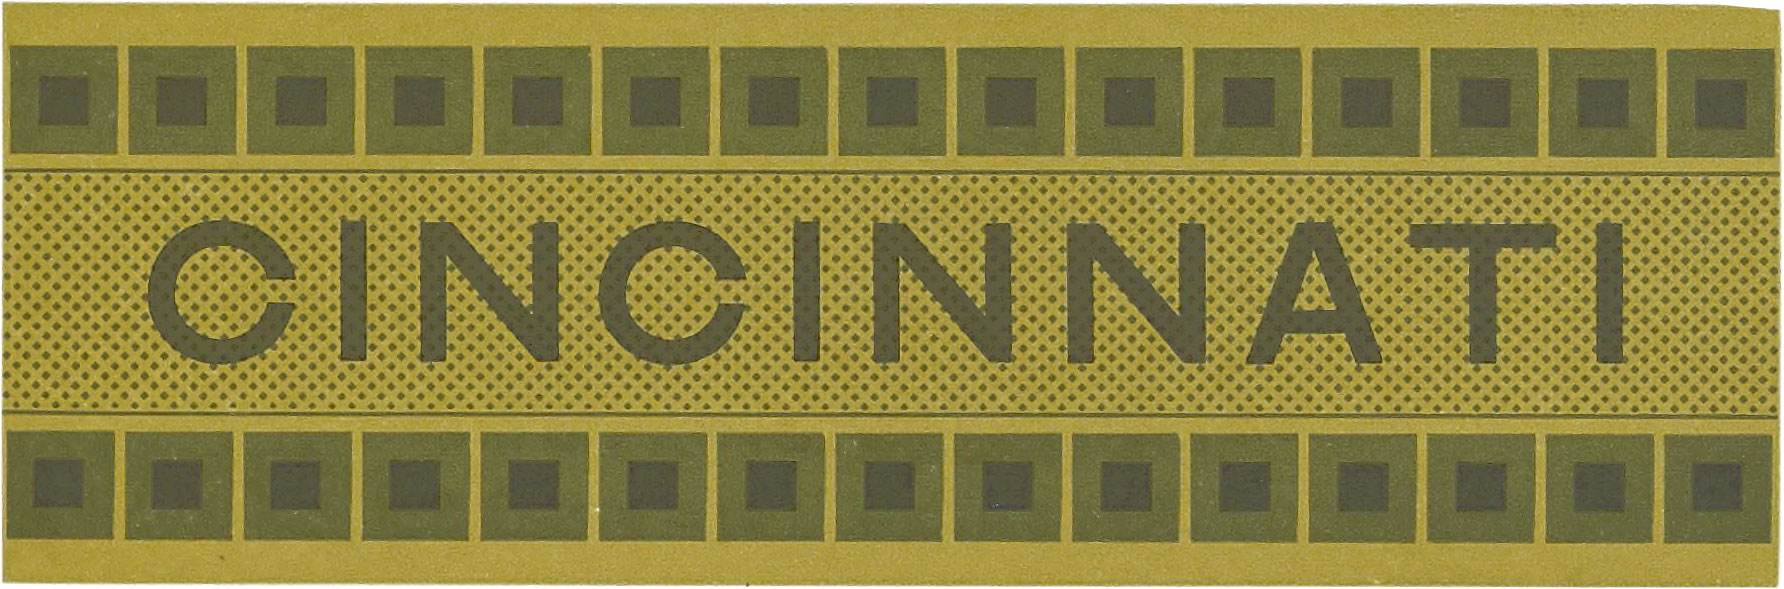 Ornate border comprising shades of green with the word 'Cincinnati' in the middle